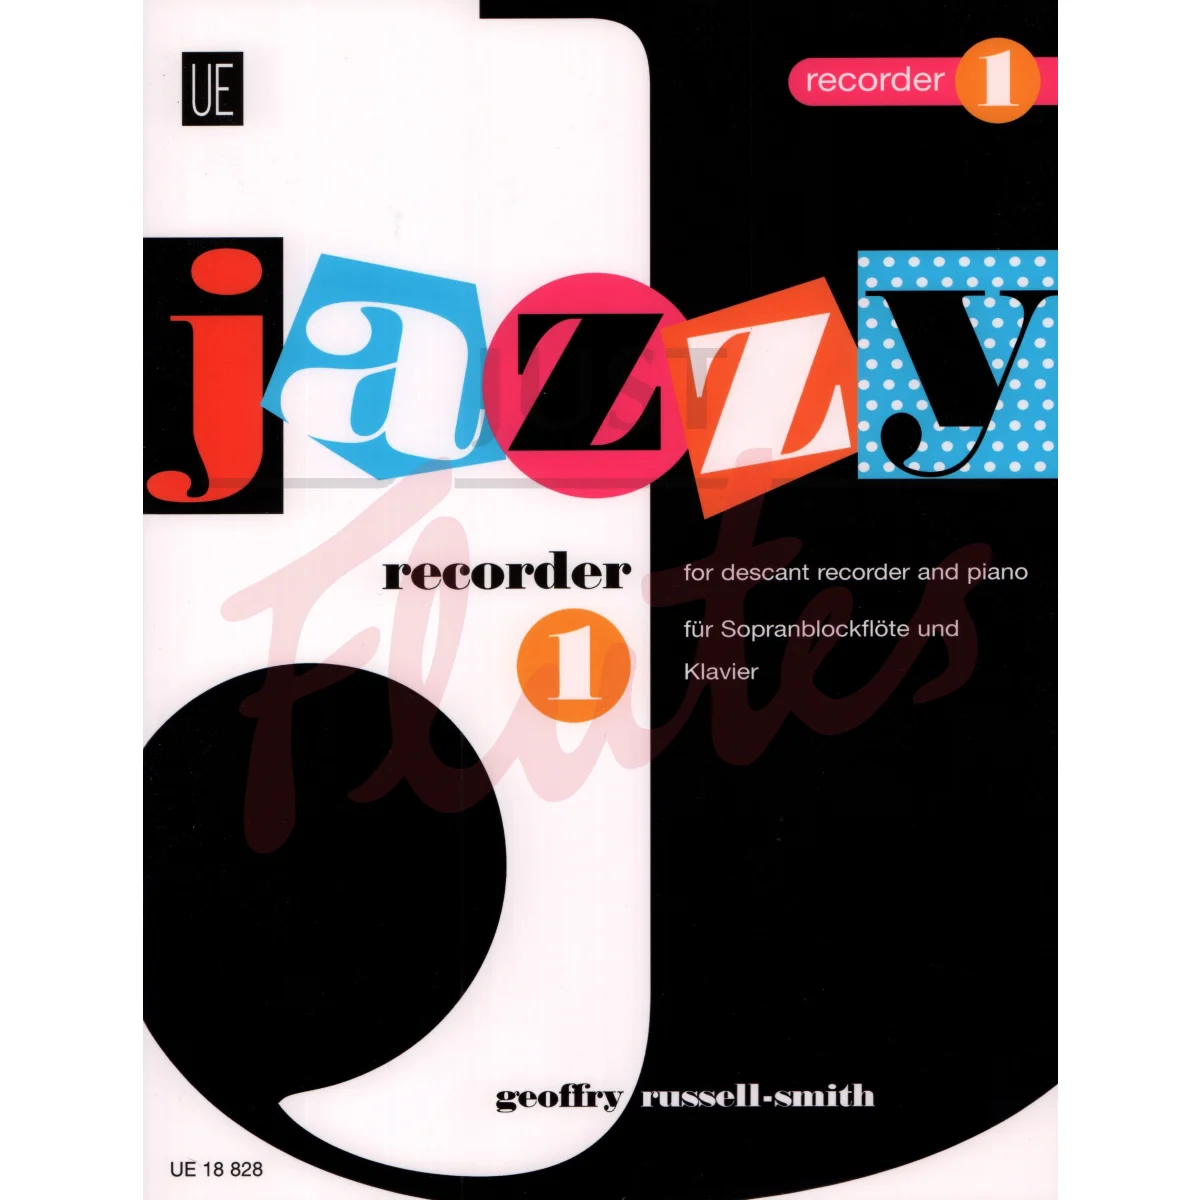 Jazzy Recorder 1 for Descant Recorder and Piano